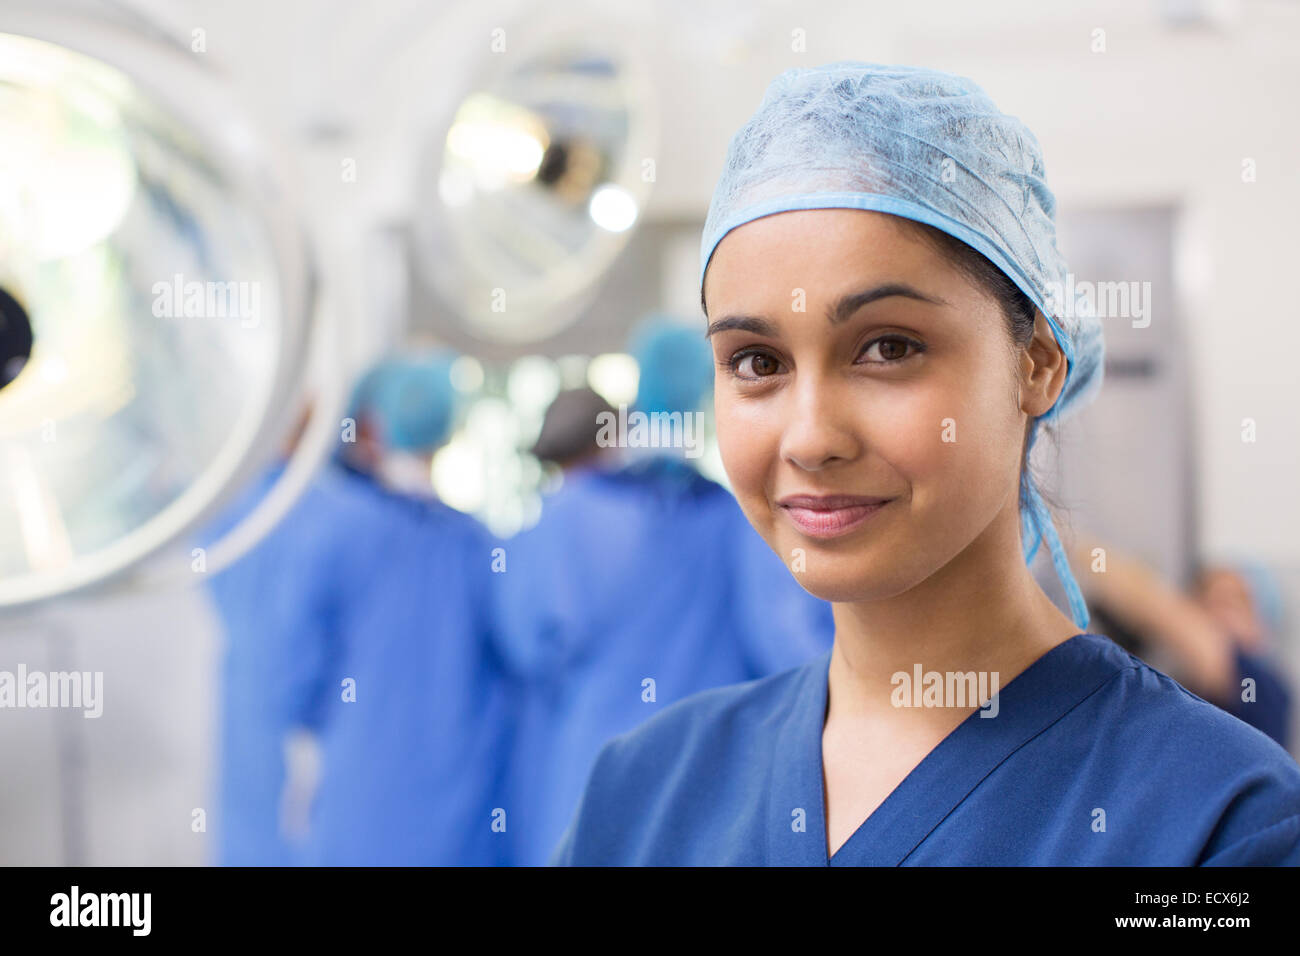 Portrait of smiling female surgical nurse wearing blue surgical cap and scrubs Stock Photo